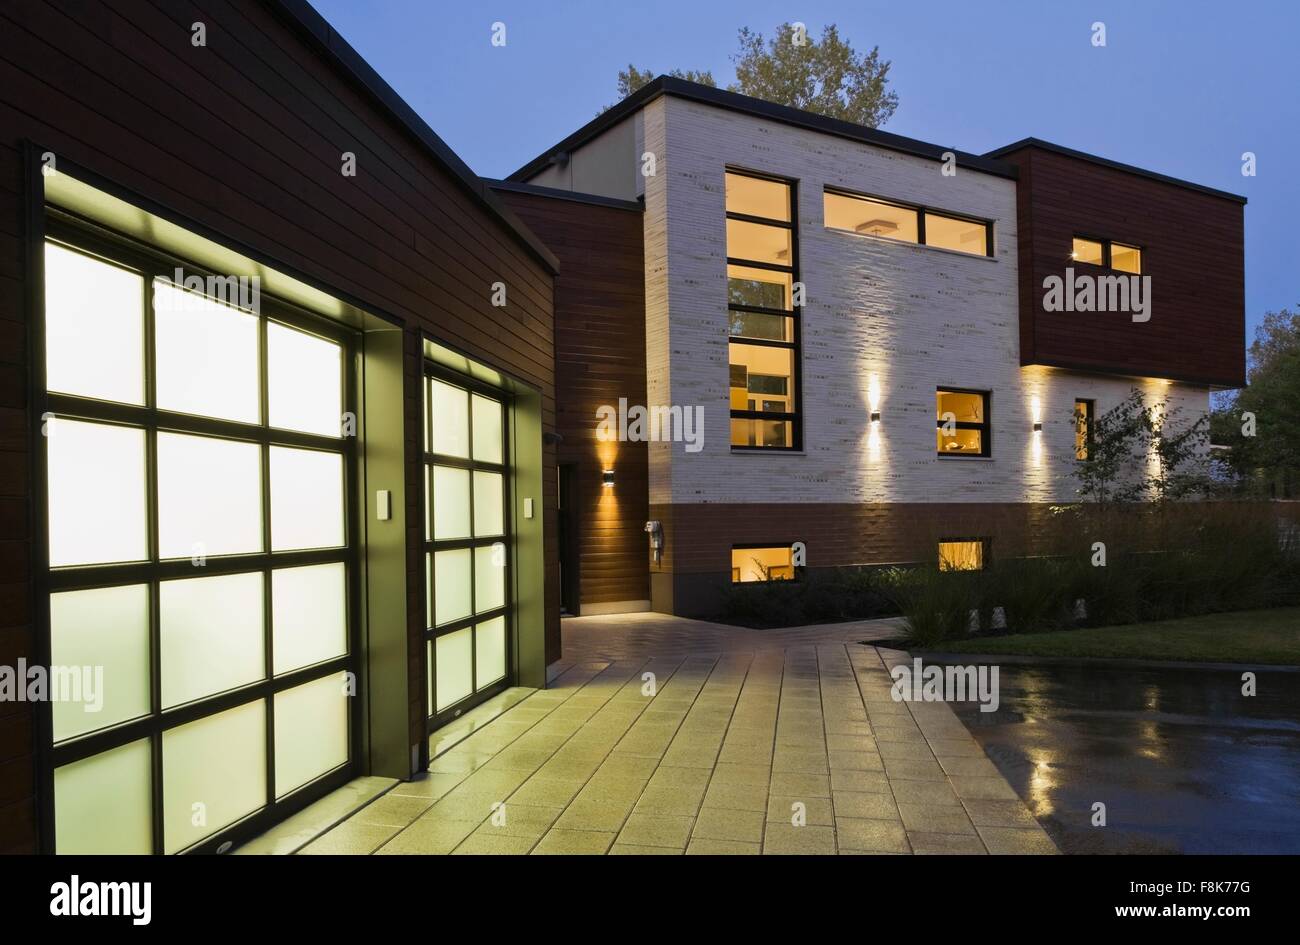 Illuminated two car garage of modern cubist style residential home at dusk, Quebec, Canada Stock Photo